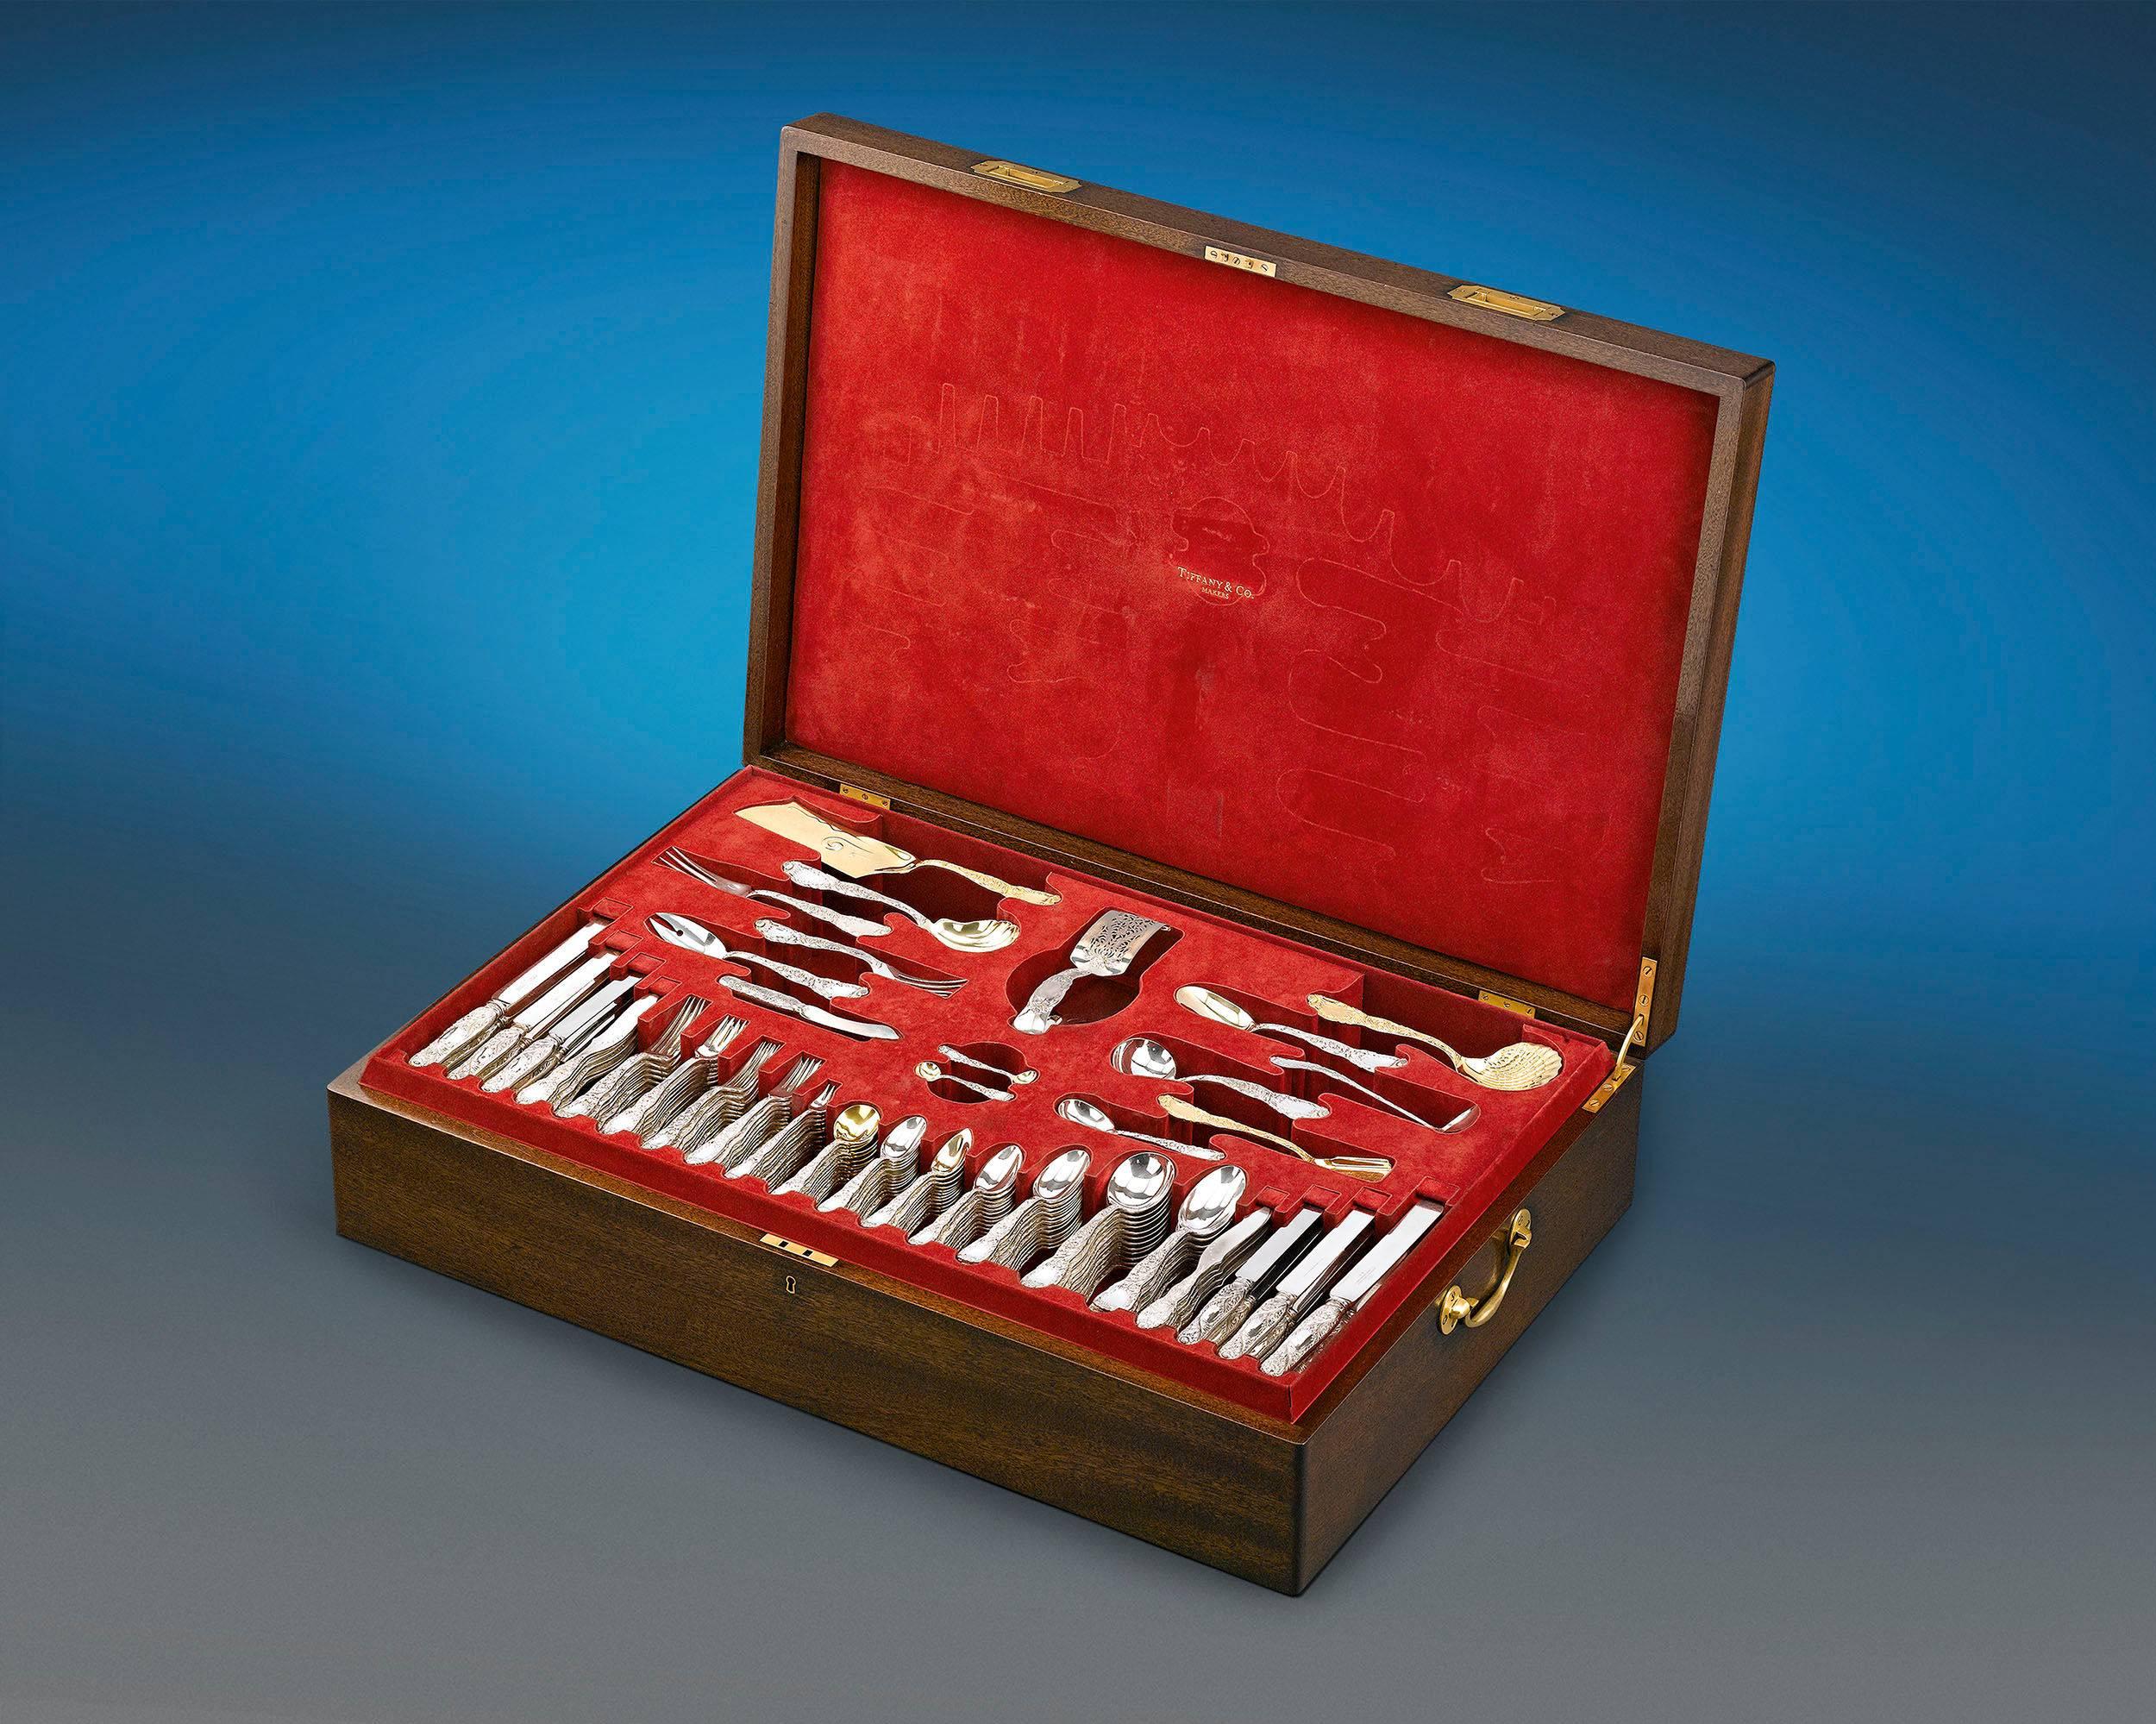 This exceptional 207-piece antique Tiffany & Co. sterling silver flatware service for 12 is crafted in the highly desirable <em>Chrysanthemum</em> pattern. Introduced in 1878 and patented in 1880, the <em>Chrysanthemum</em> pattern is considered